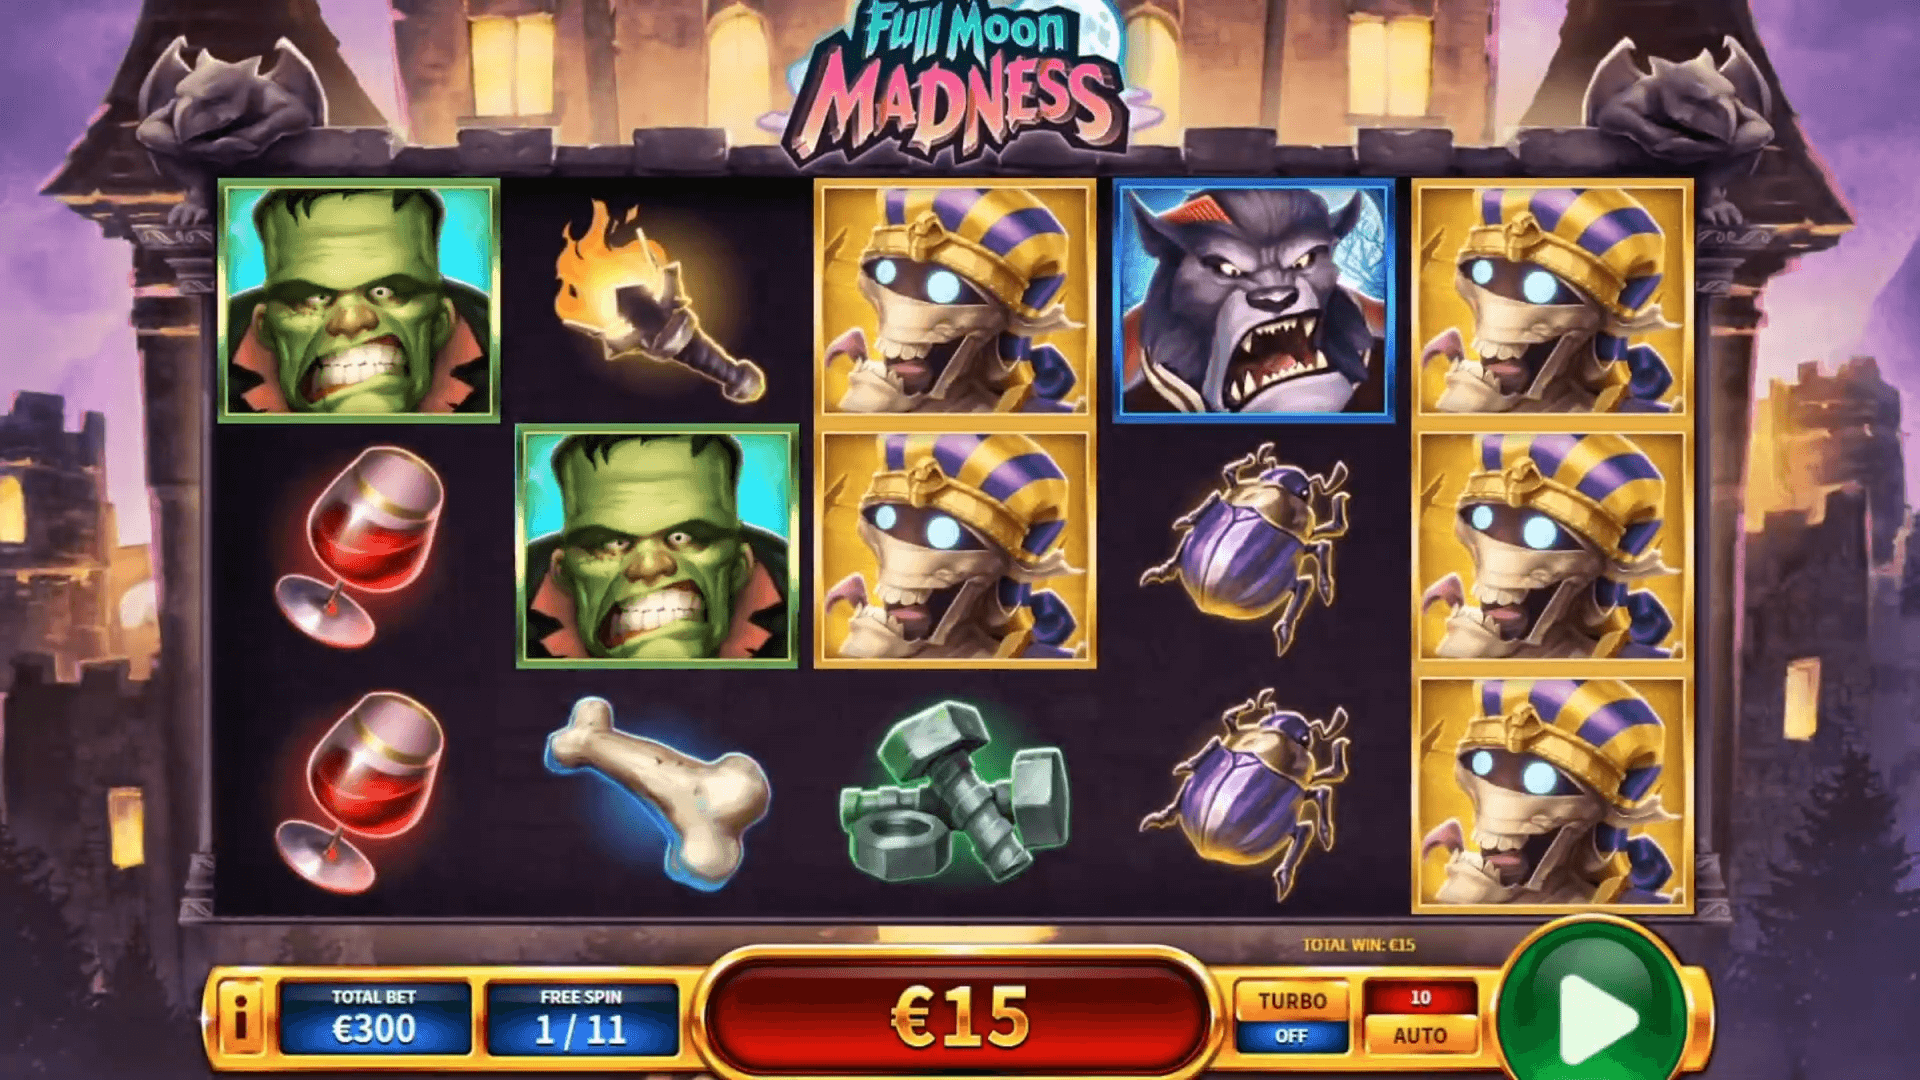 Full Moon Madness Review